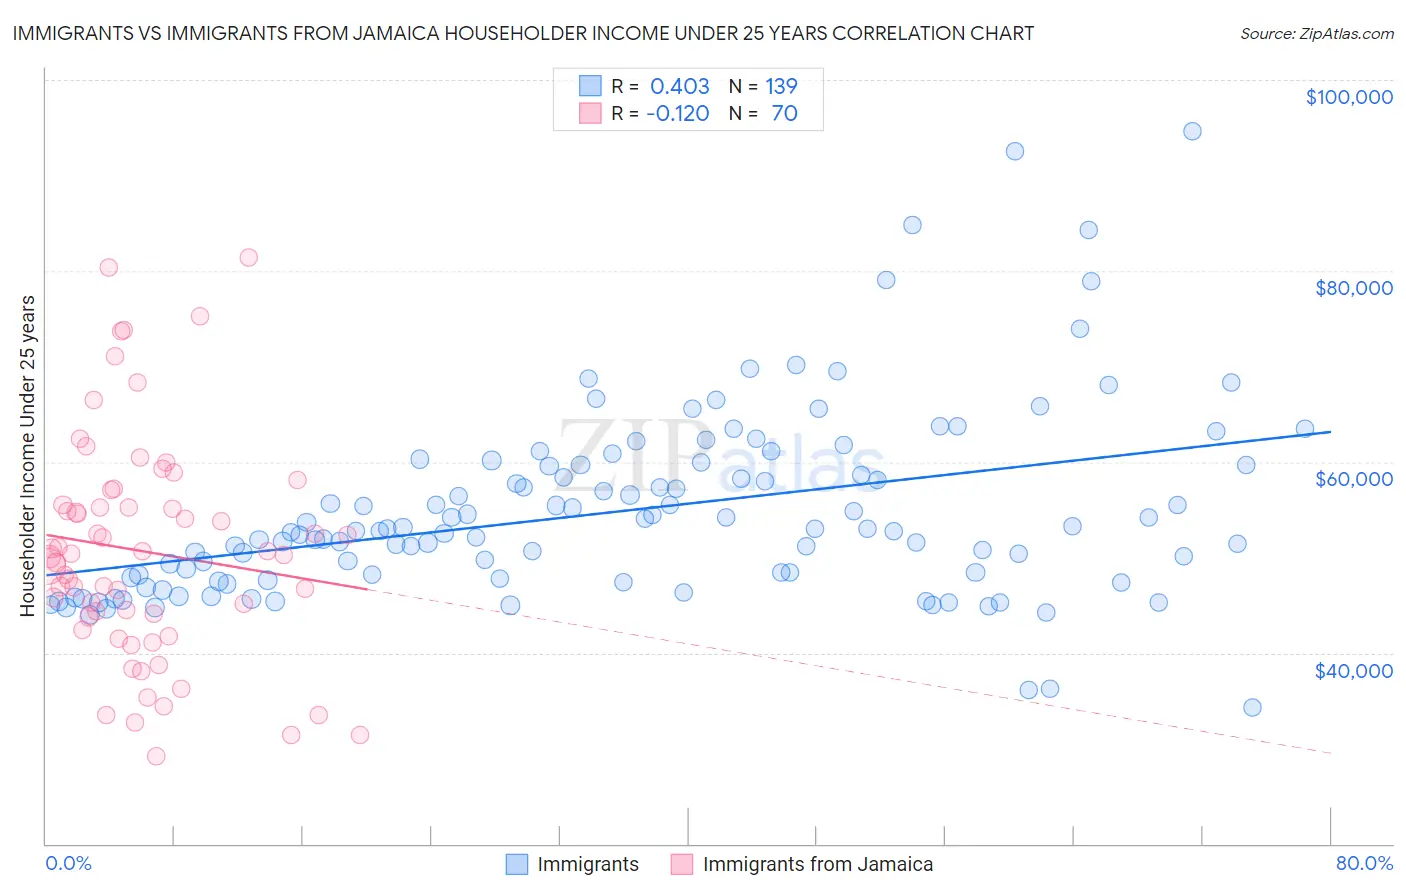 Immigrants vs Immigrants from Jamaica Householder Income Under 25 years